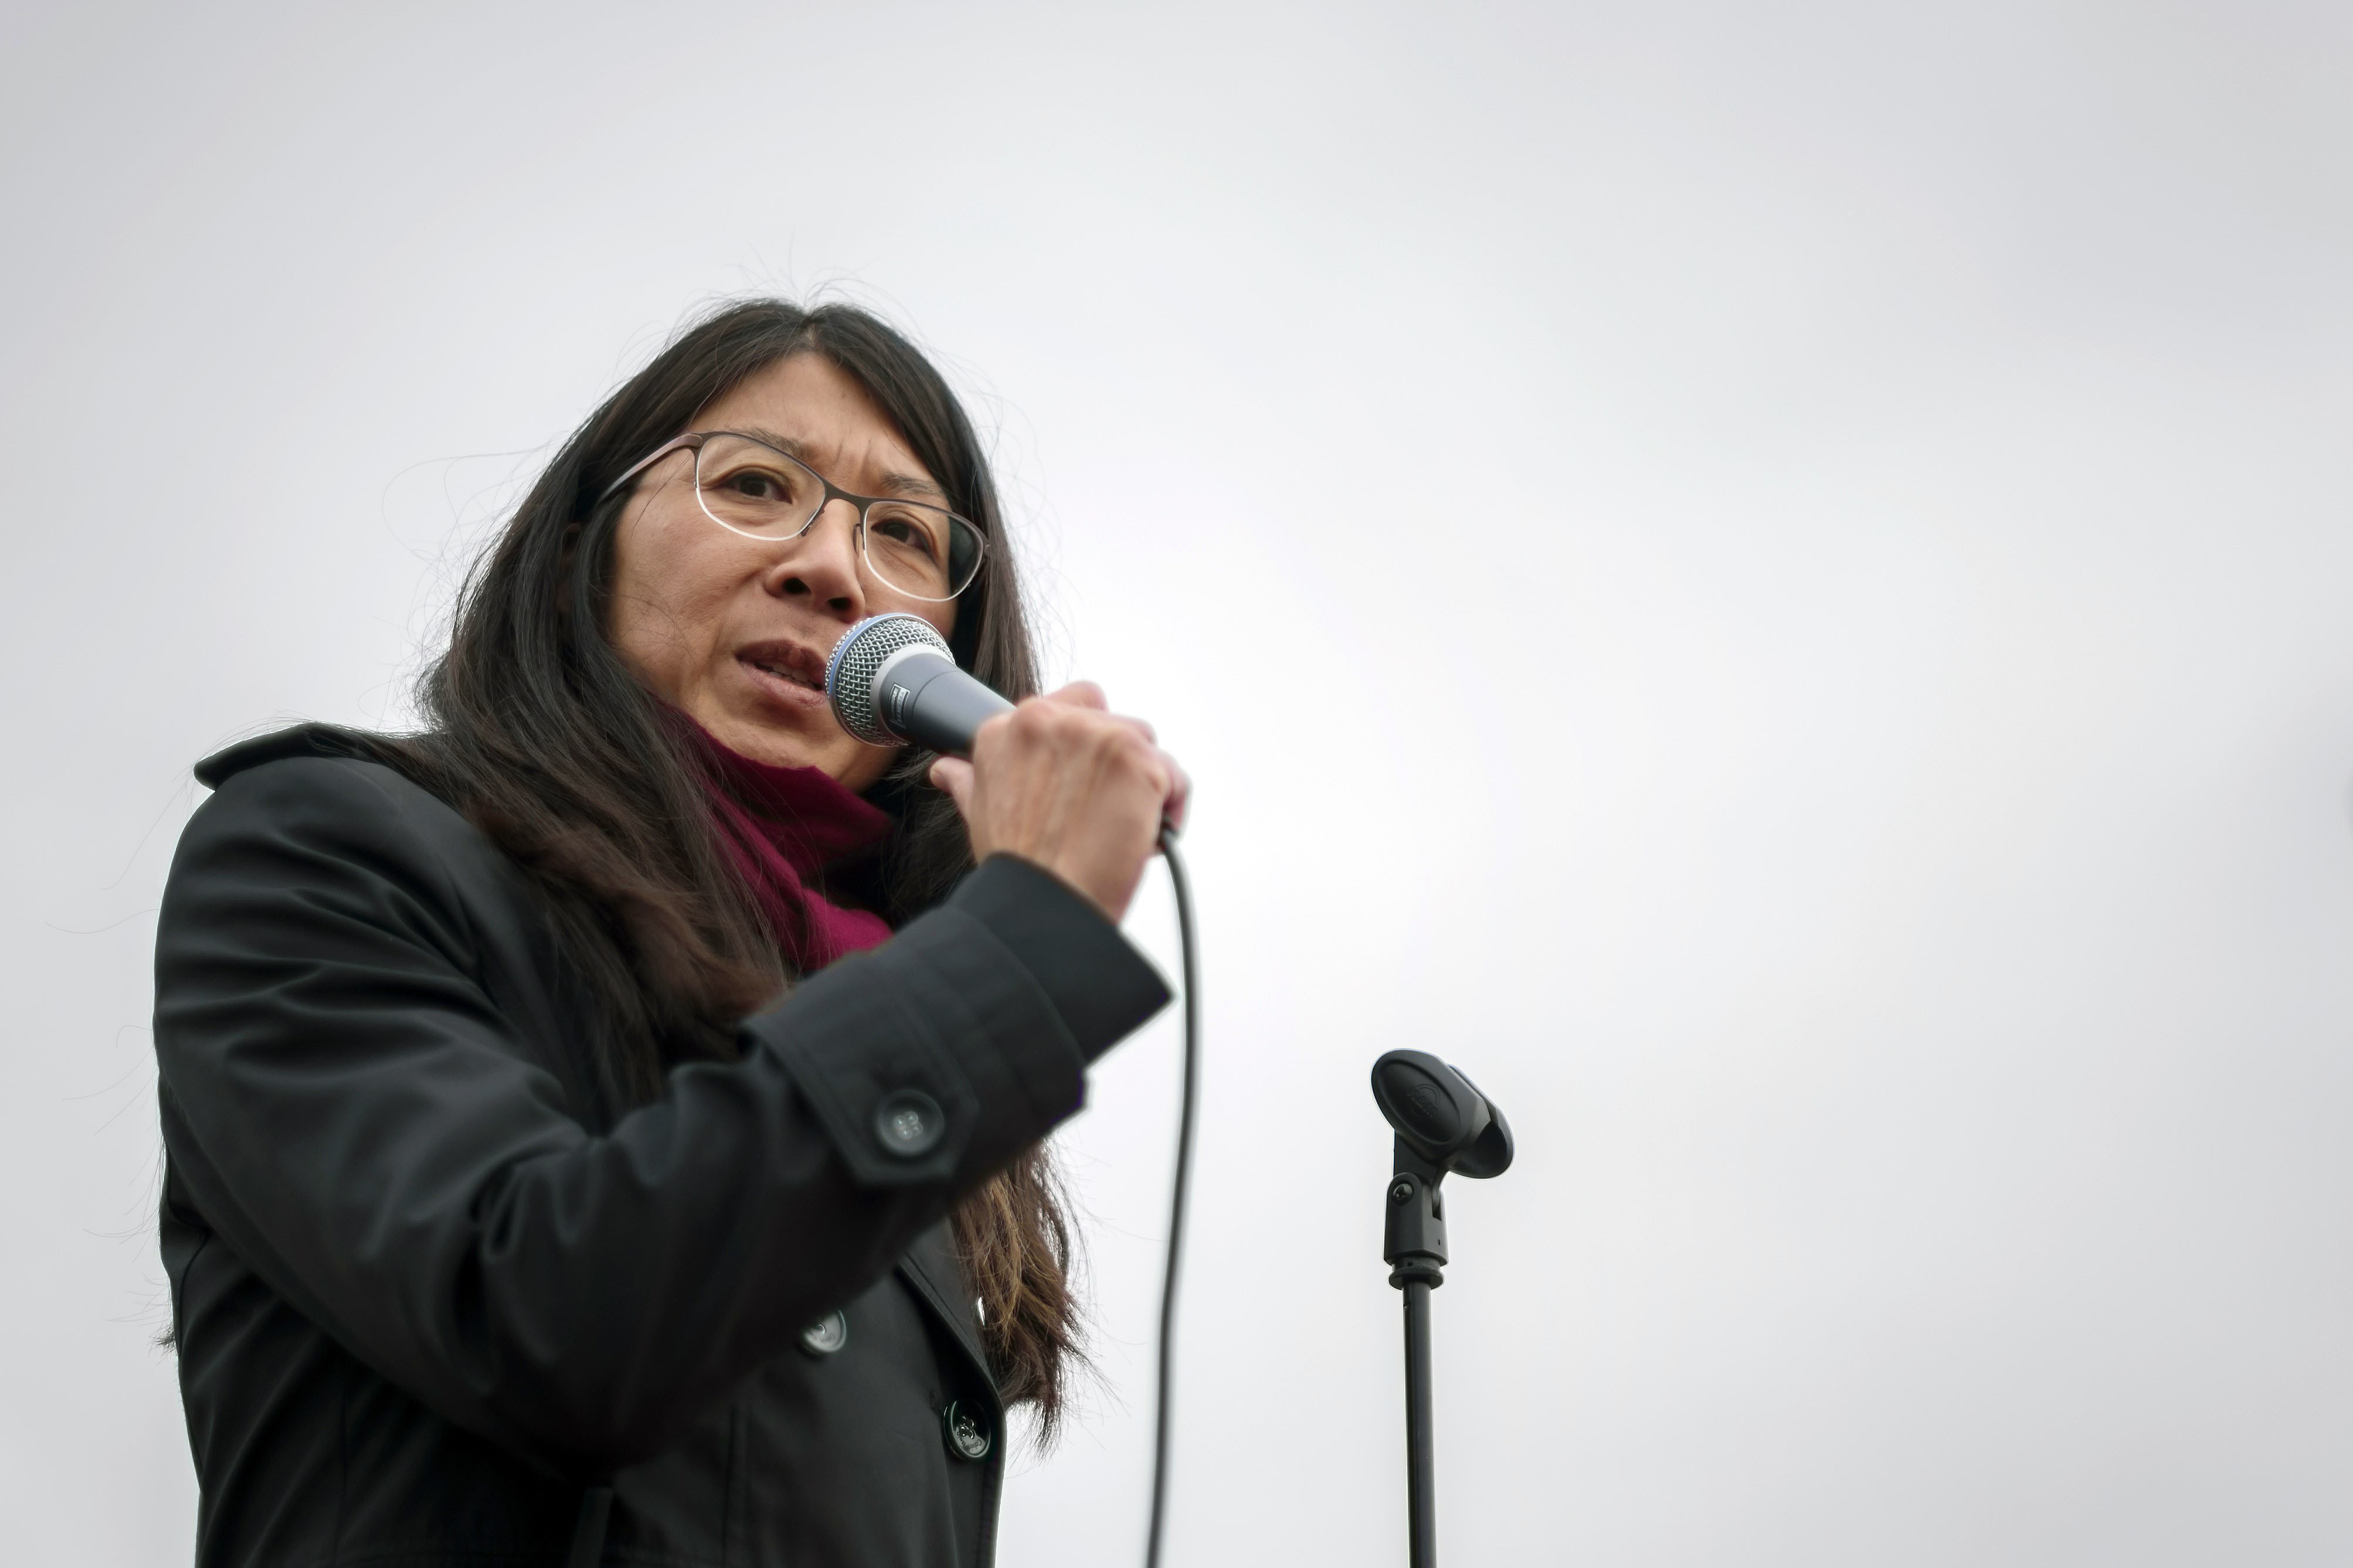 Doctors Without Borders, also known by its French name Medecins Sans Frontieres (MSF) International President Joanne Liu delivers a speech during a demonstration on November 3, 2015 in Geneva, following the bombing on October 3, 2015 by US forces of a hospital of the medical charity in the northern Afghanistan city of Kunduz which killed 22 people, including 12 of the medical charity's staff.  AFP PHOTO / FABRICE COFFRINI        (Photo credit should read FABRICE COFFRINI/AFP/Getty Images)